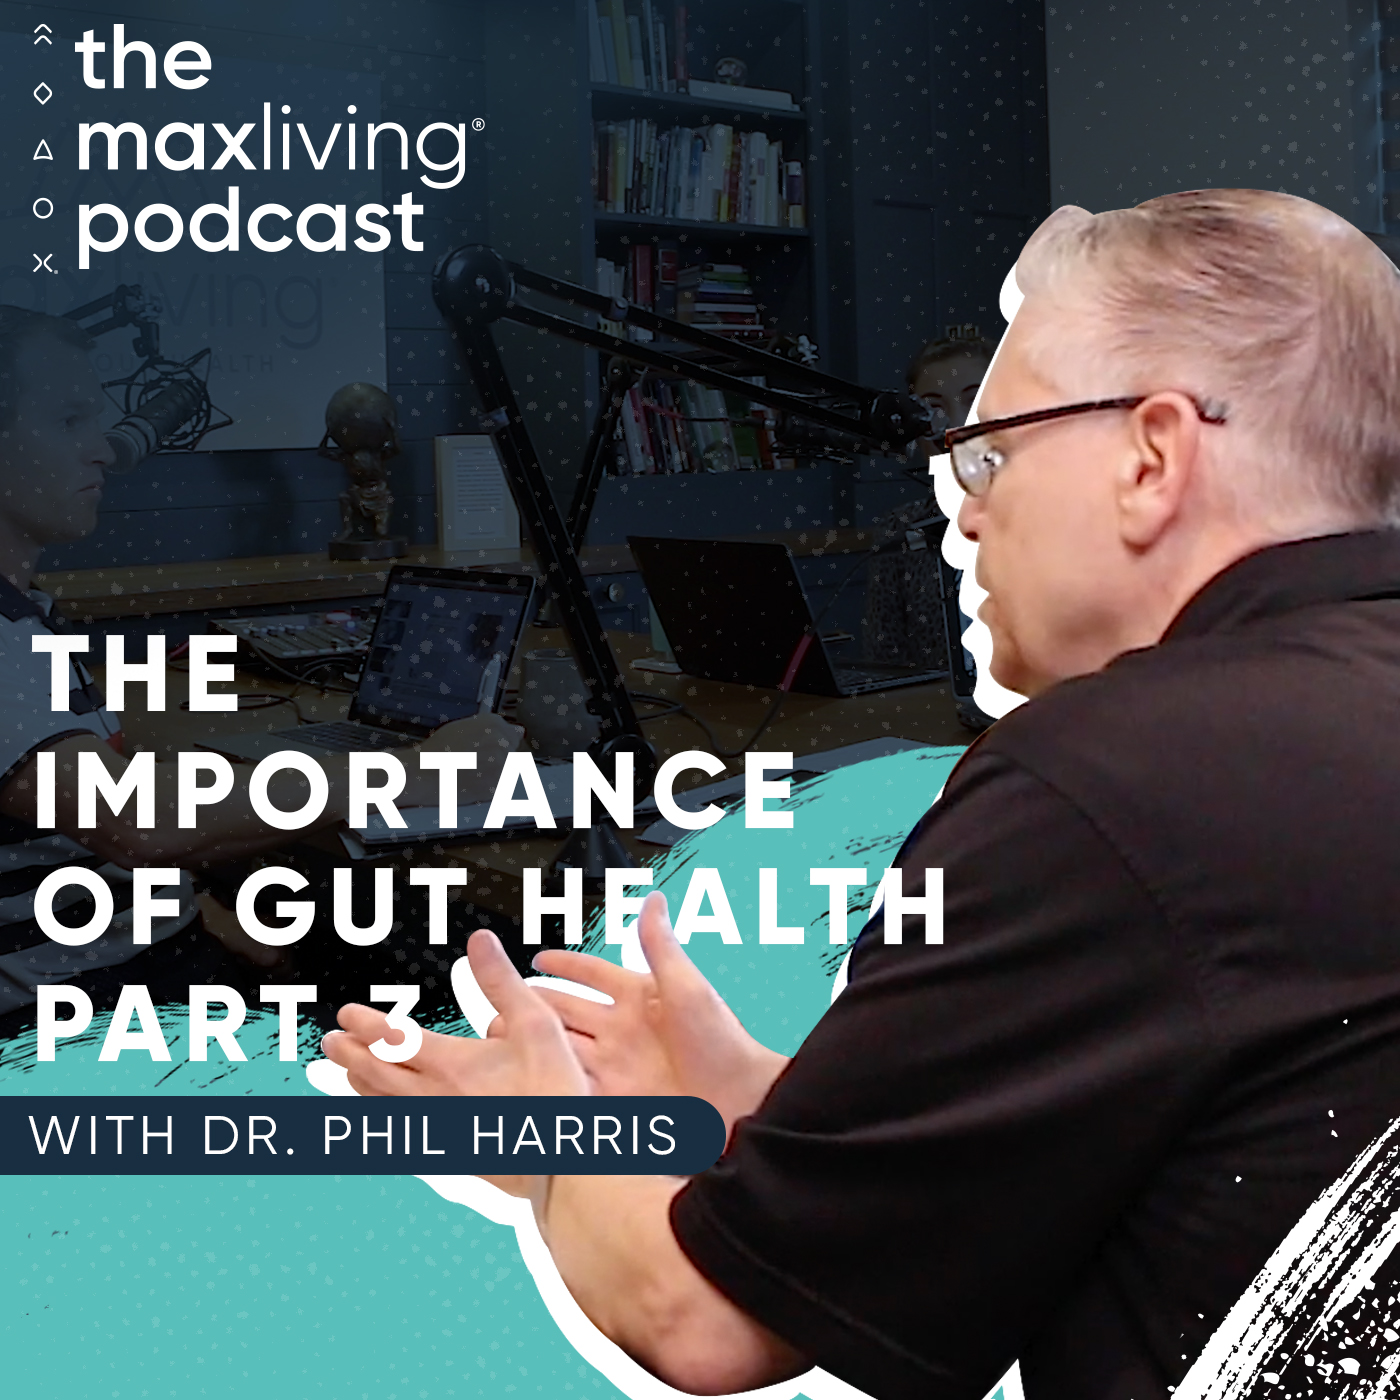 The Importance of Gut Health Part 3